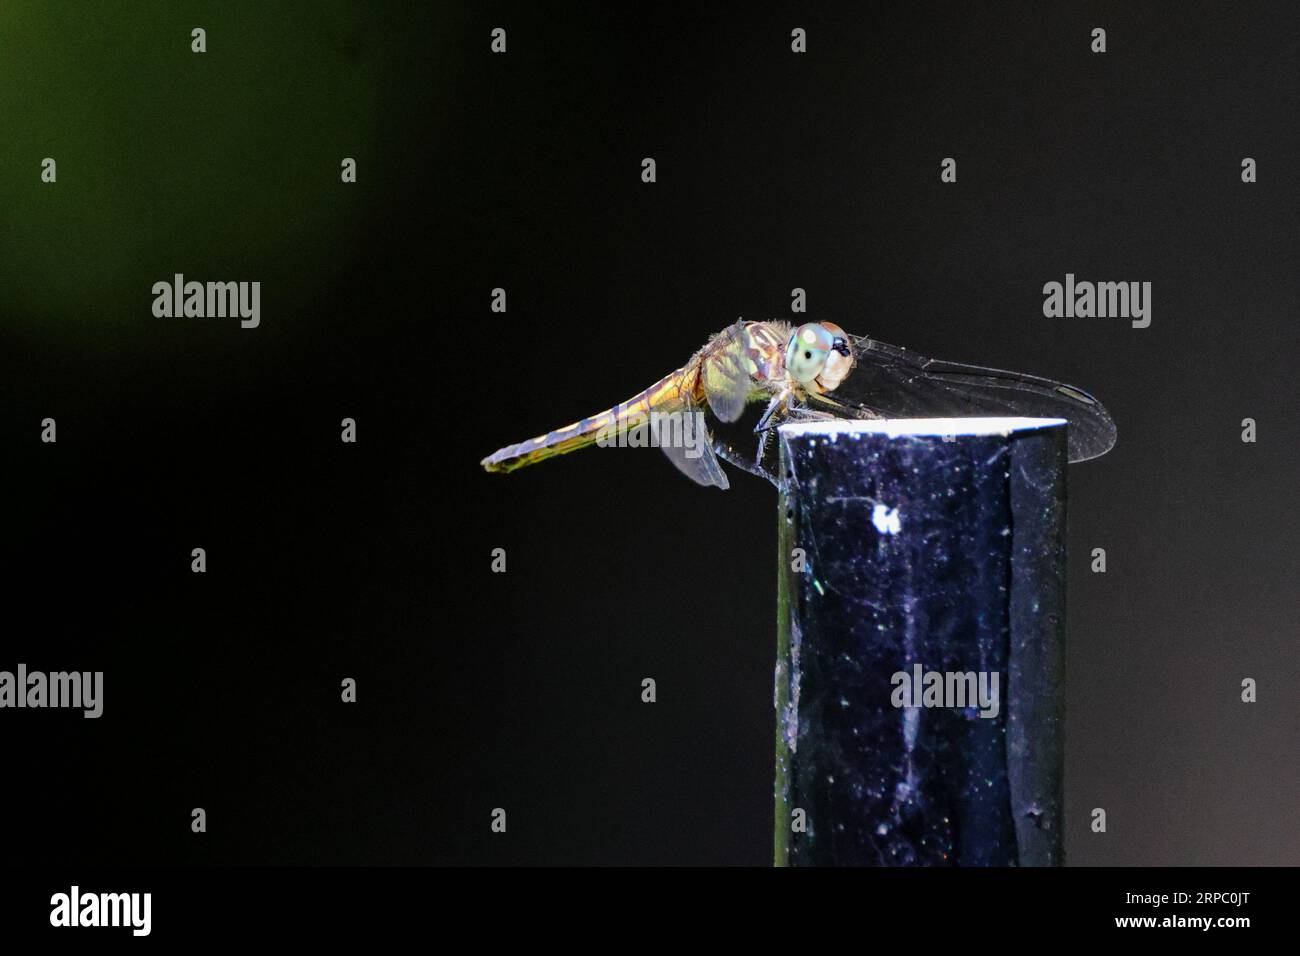 A vibrant dragonfly perched on a glass holder situated on a wooden table Stock Photo